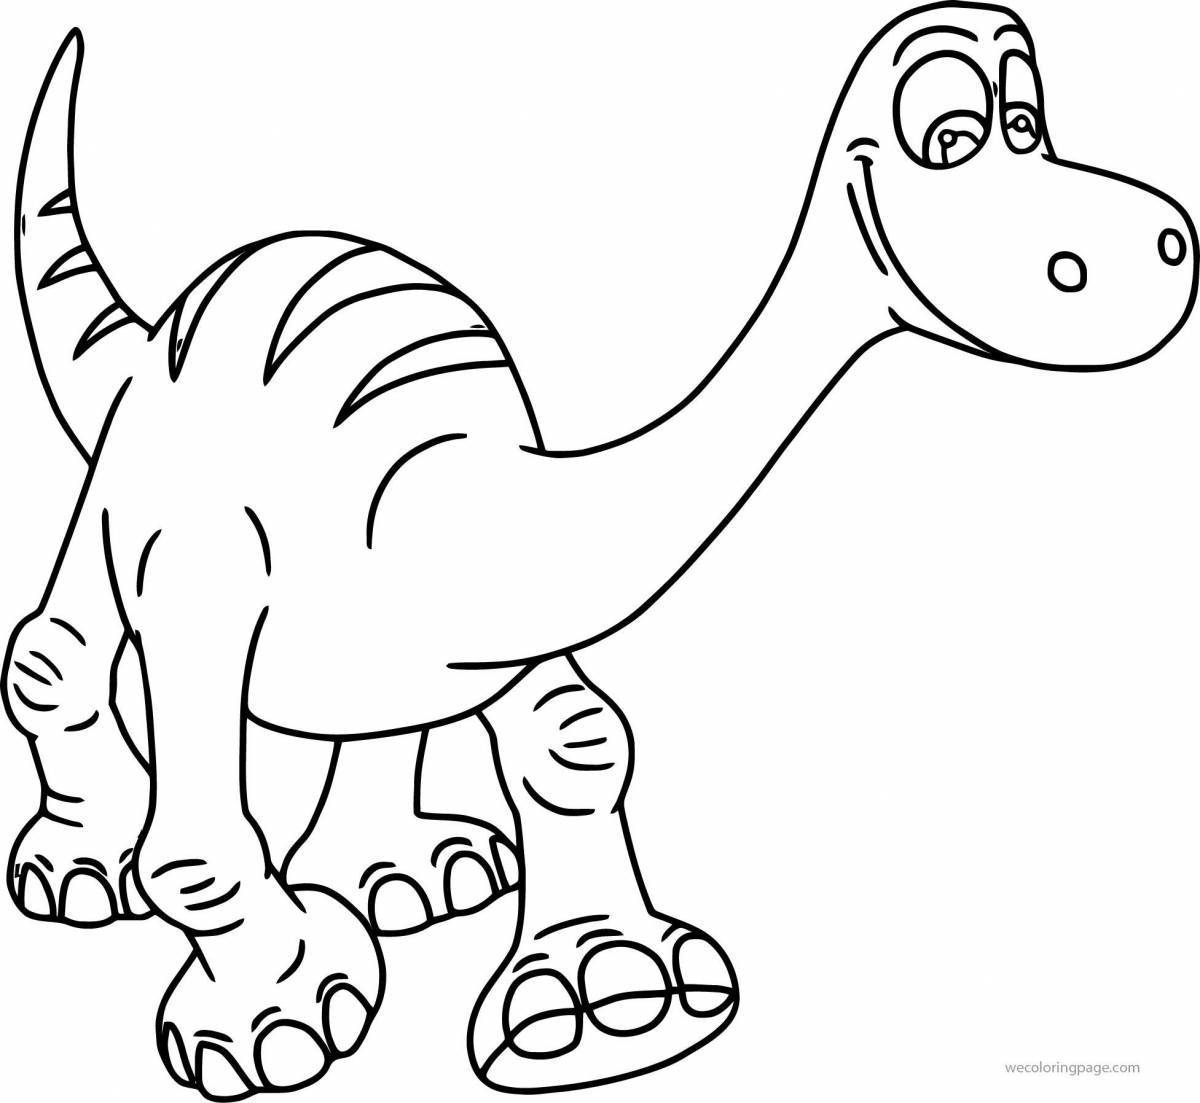 Bright dinosaur coloring book for 4-5 year olds